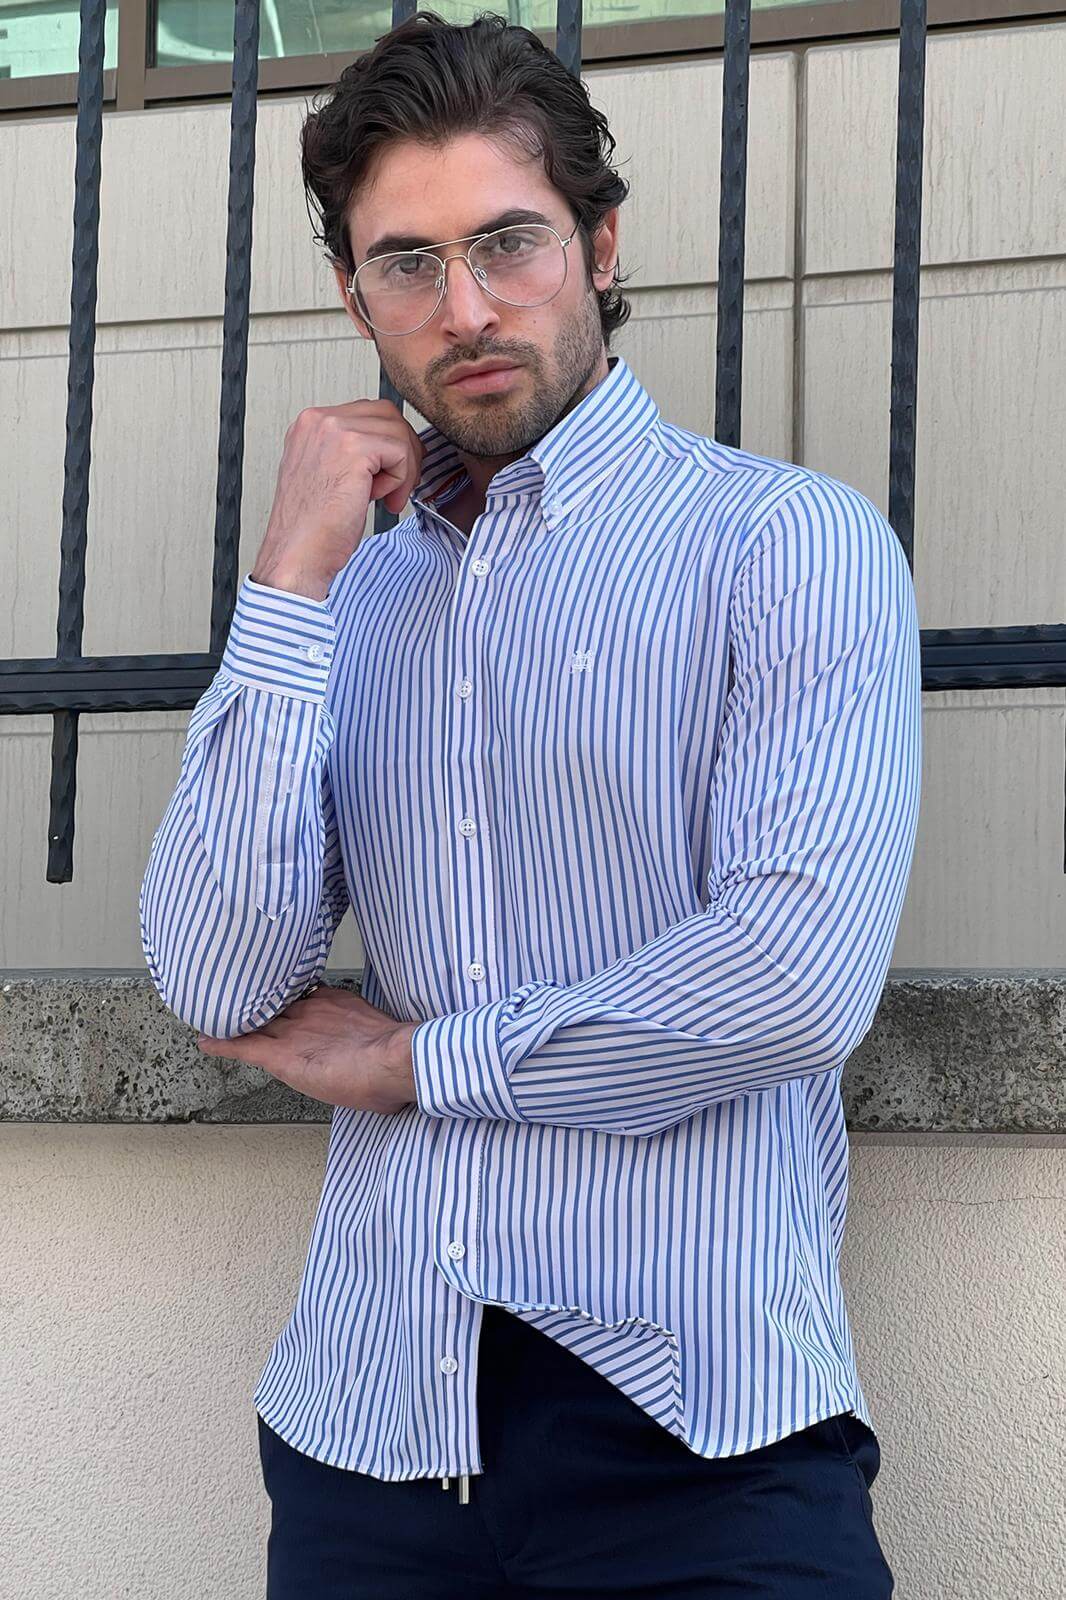 A Slim Fit Stripped white and Blue Cotton Shirt on display